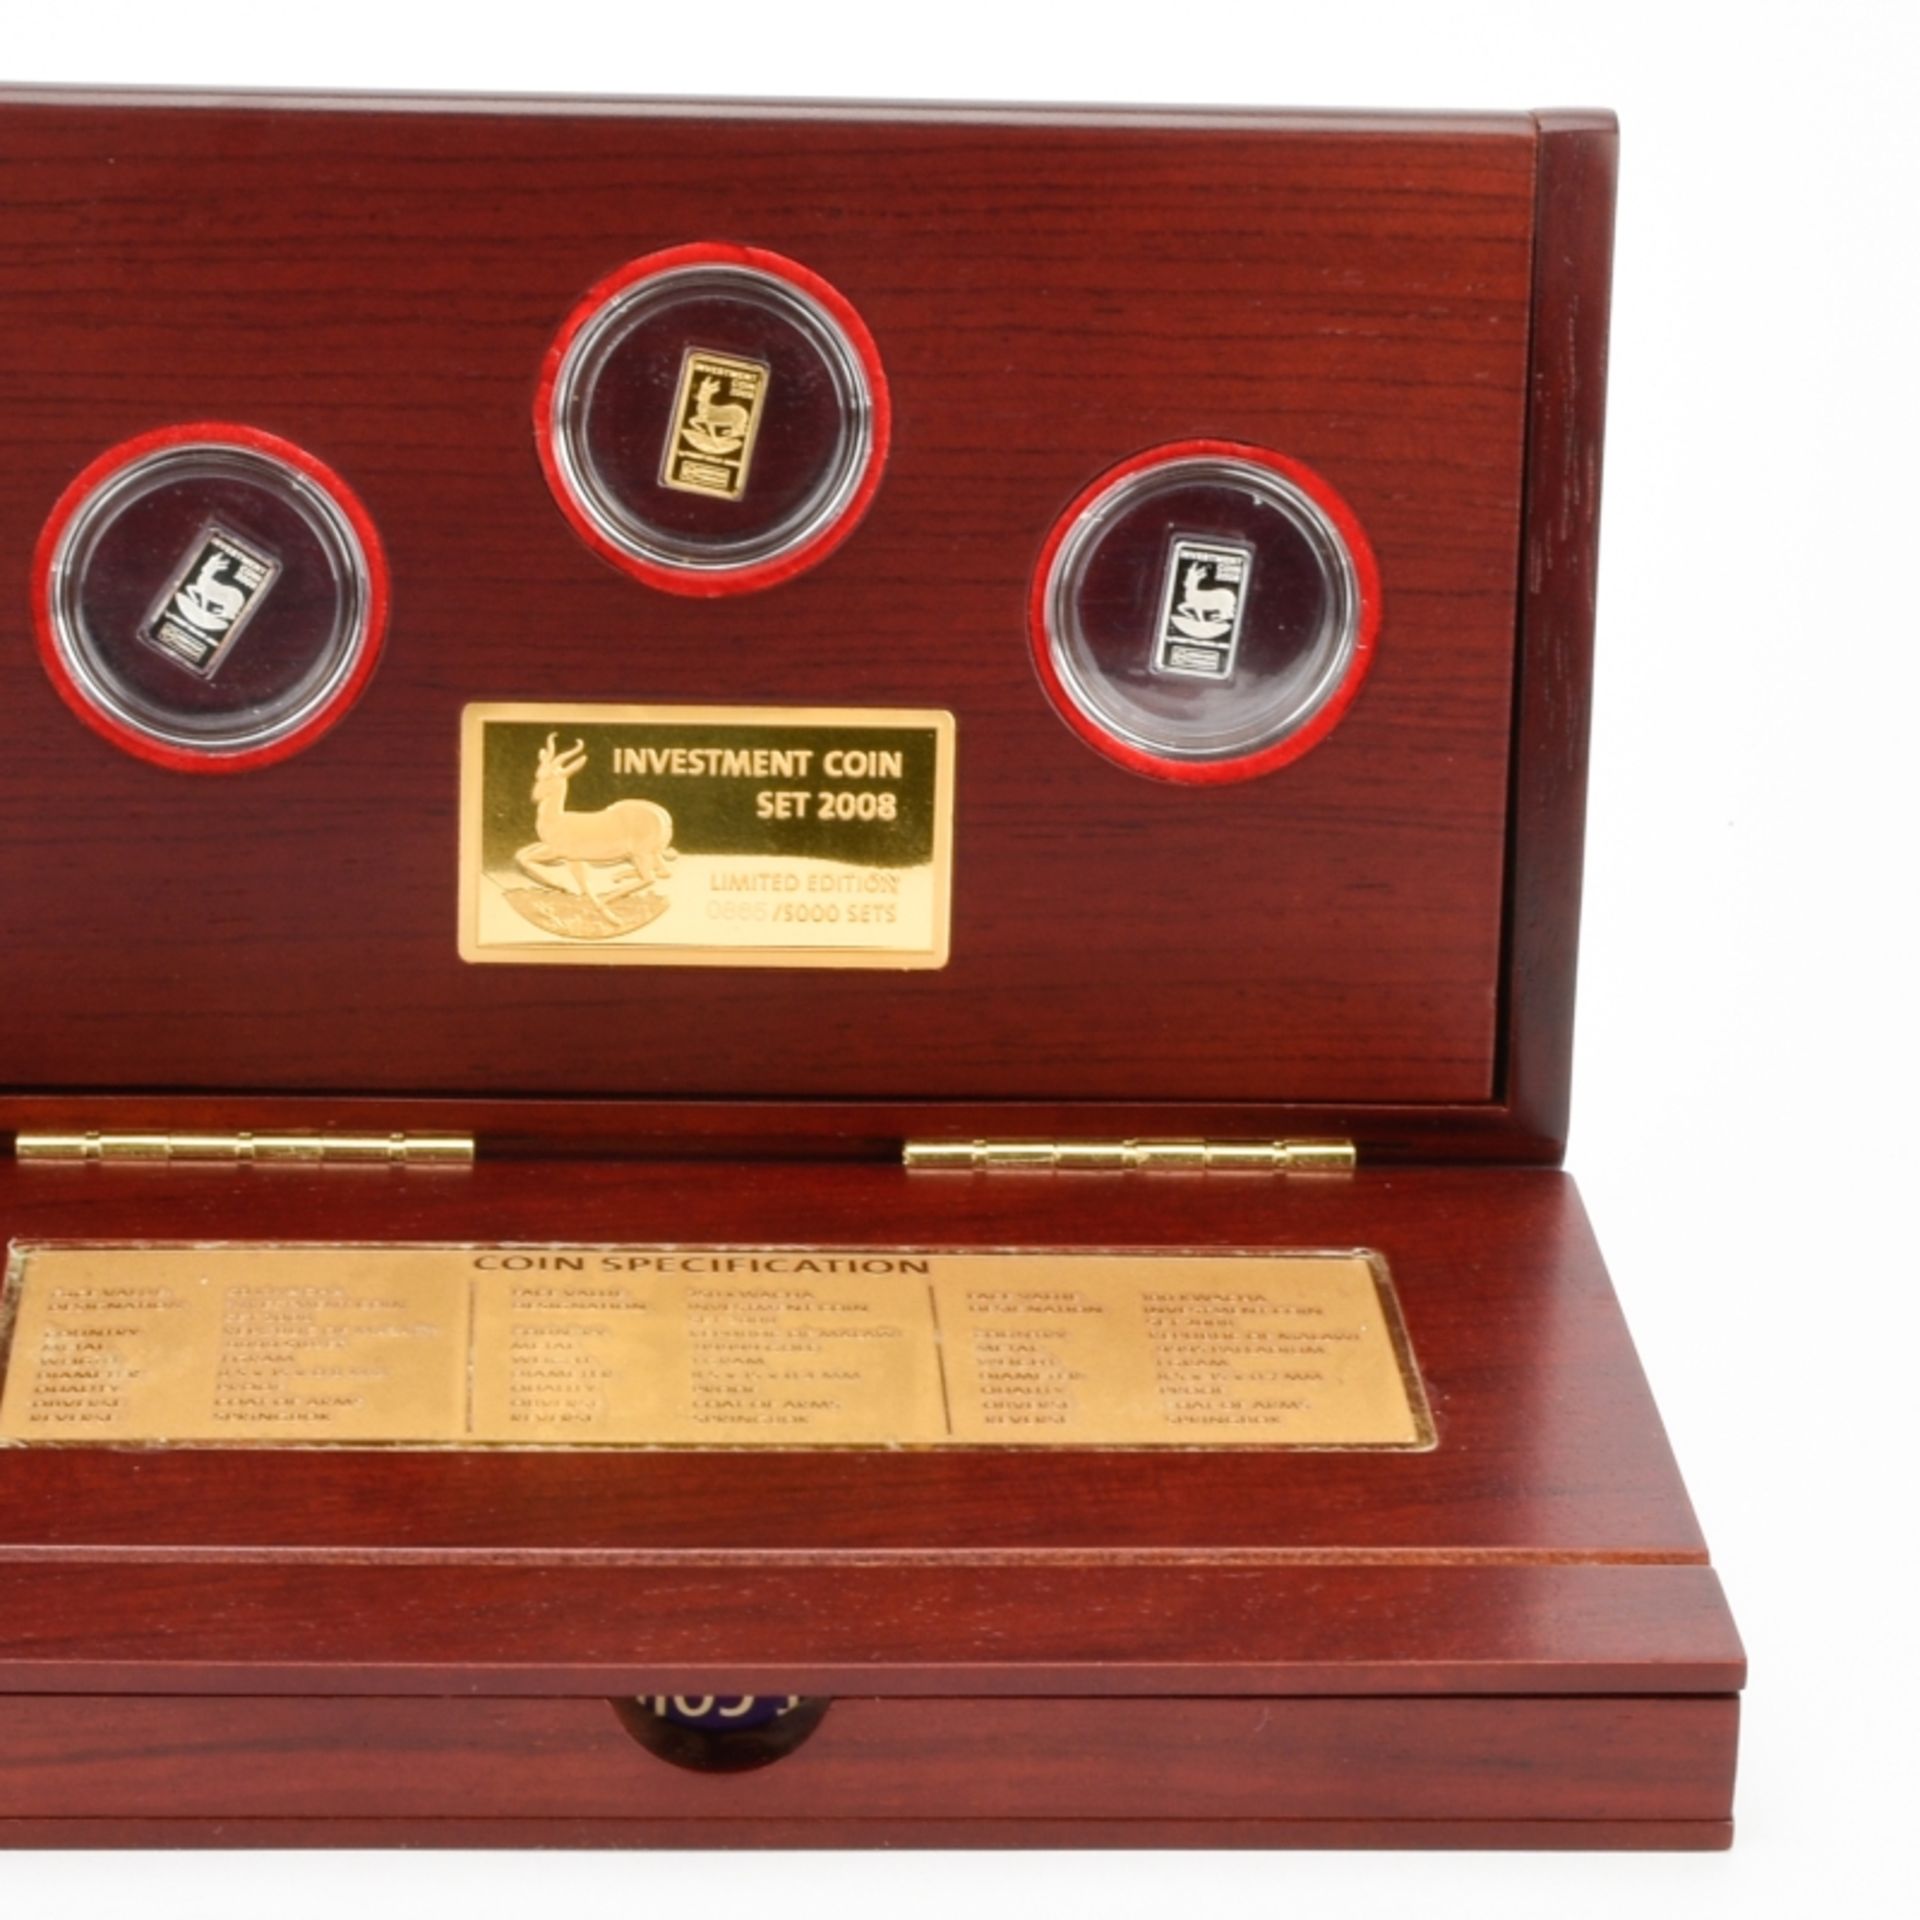 Investment Coin Set 2008 